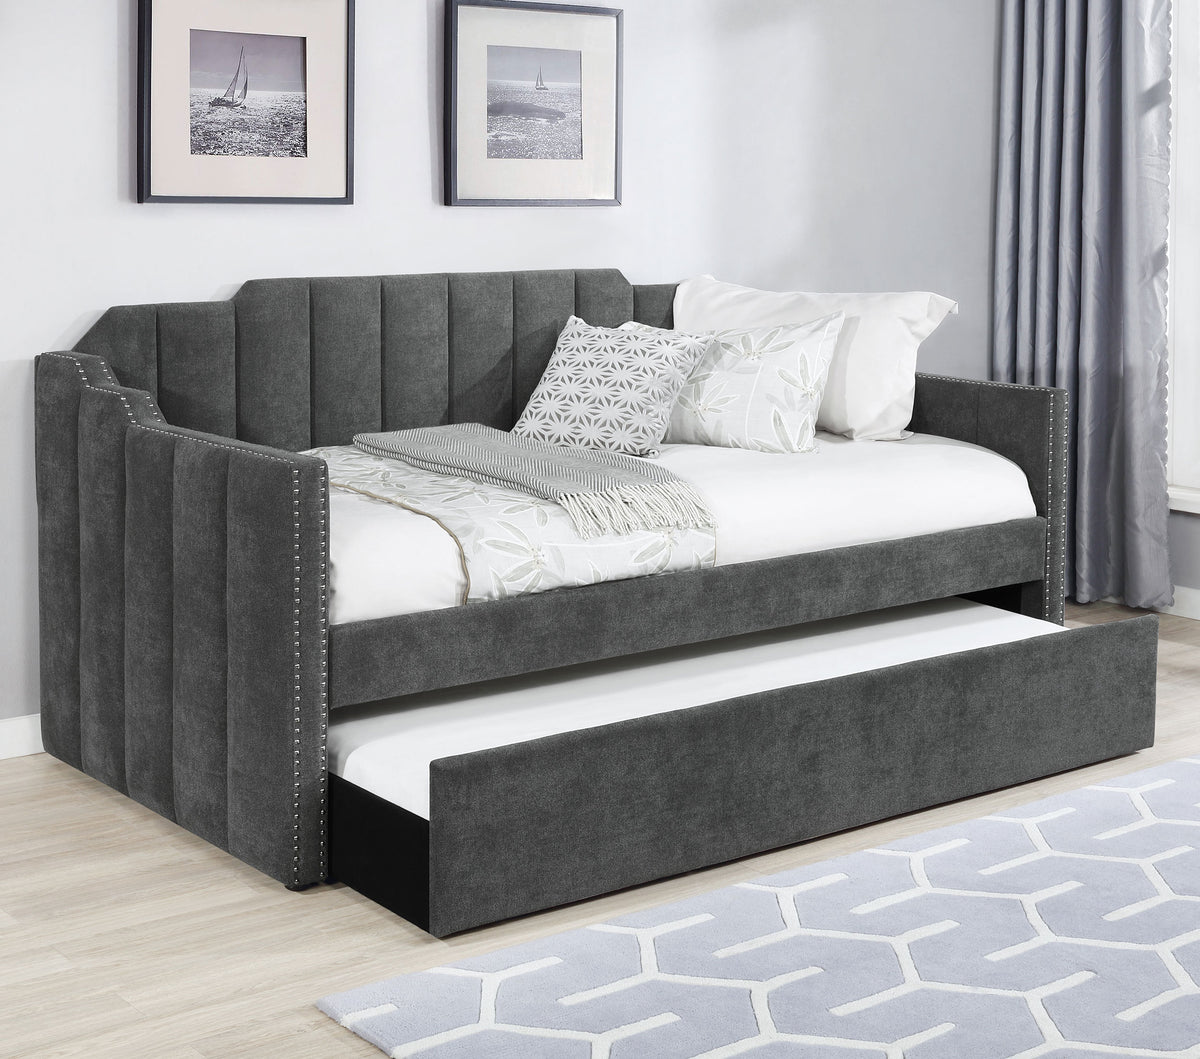 Kingston Upholstered Twin Daybed with Trundle Charcoal Kingston Upholstered Twin Daybed with Trundle Charcoal Half Price Furniture